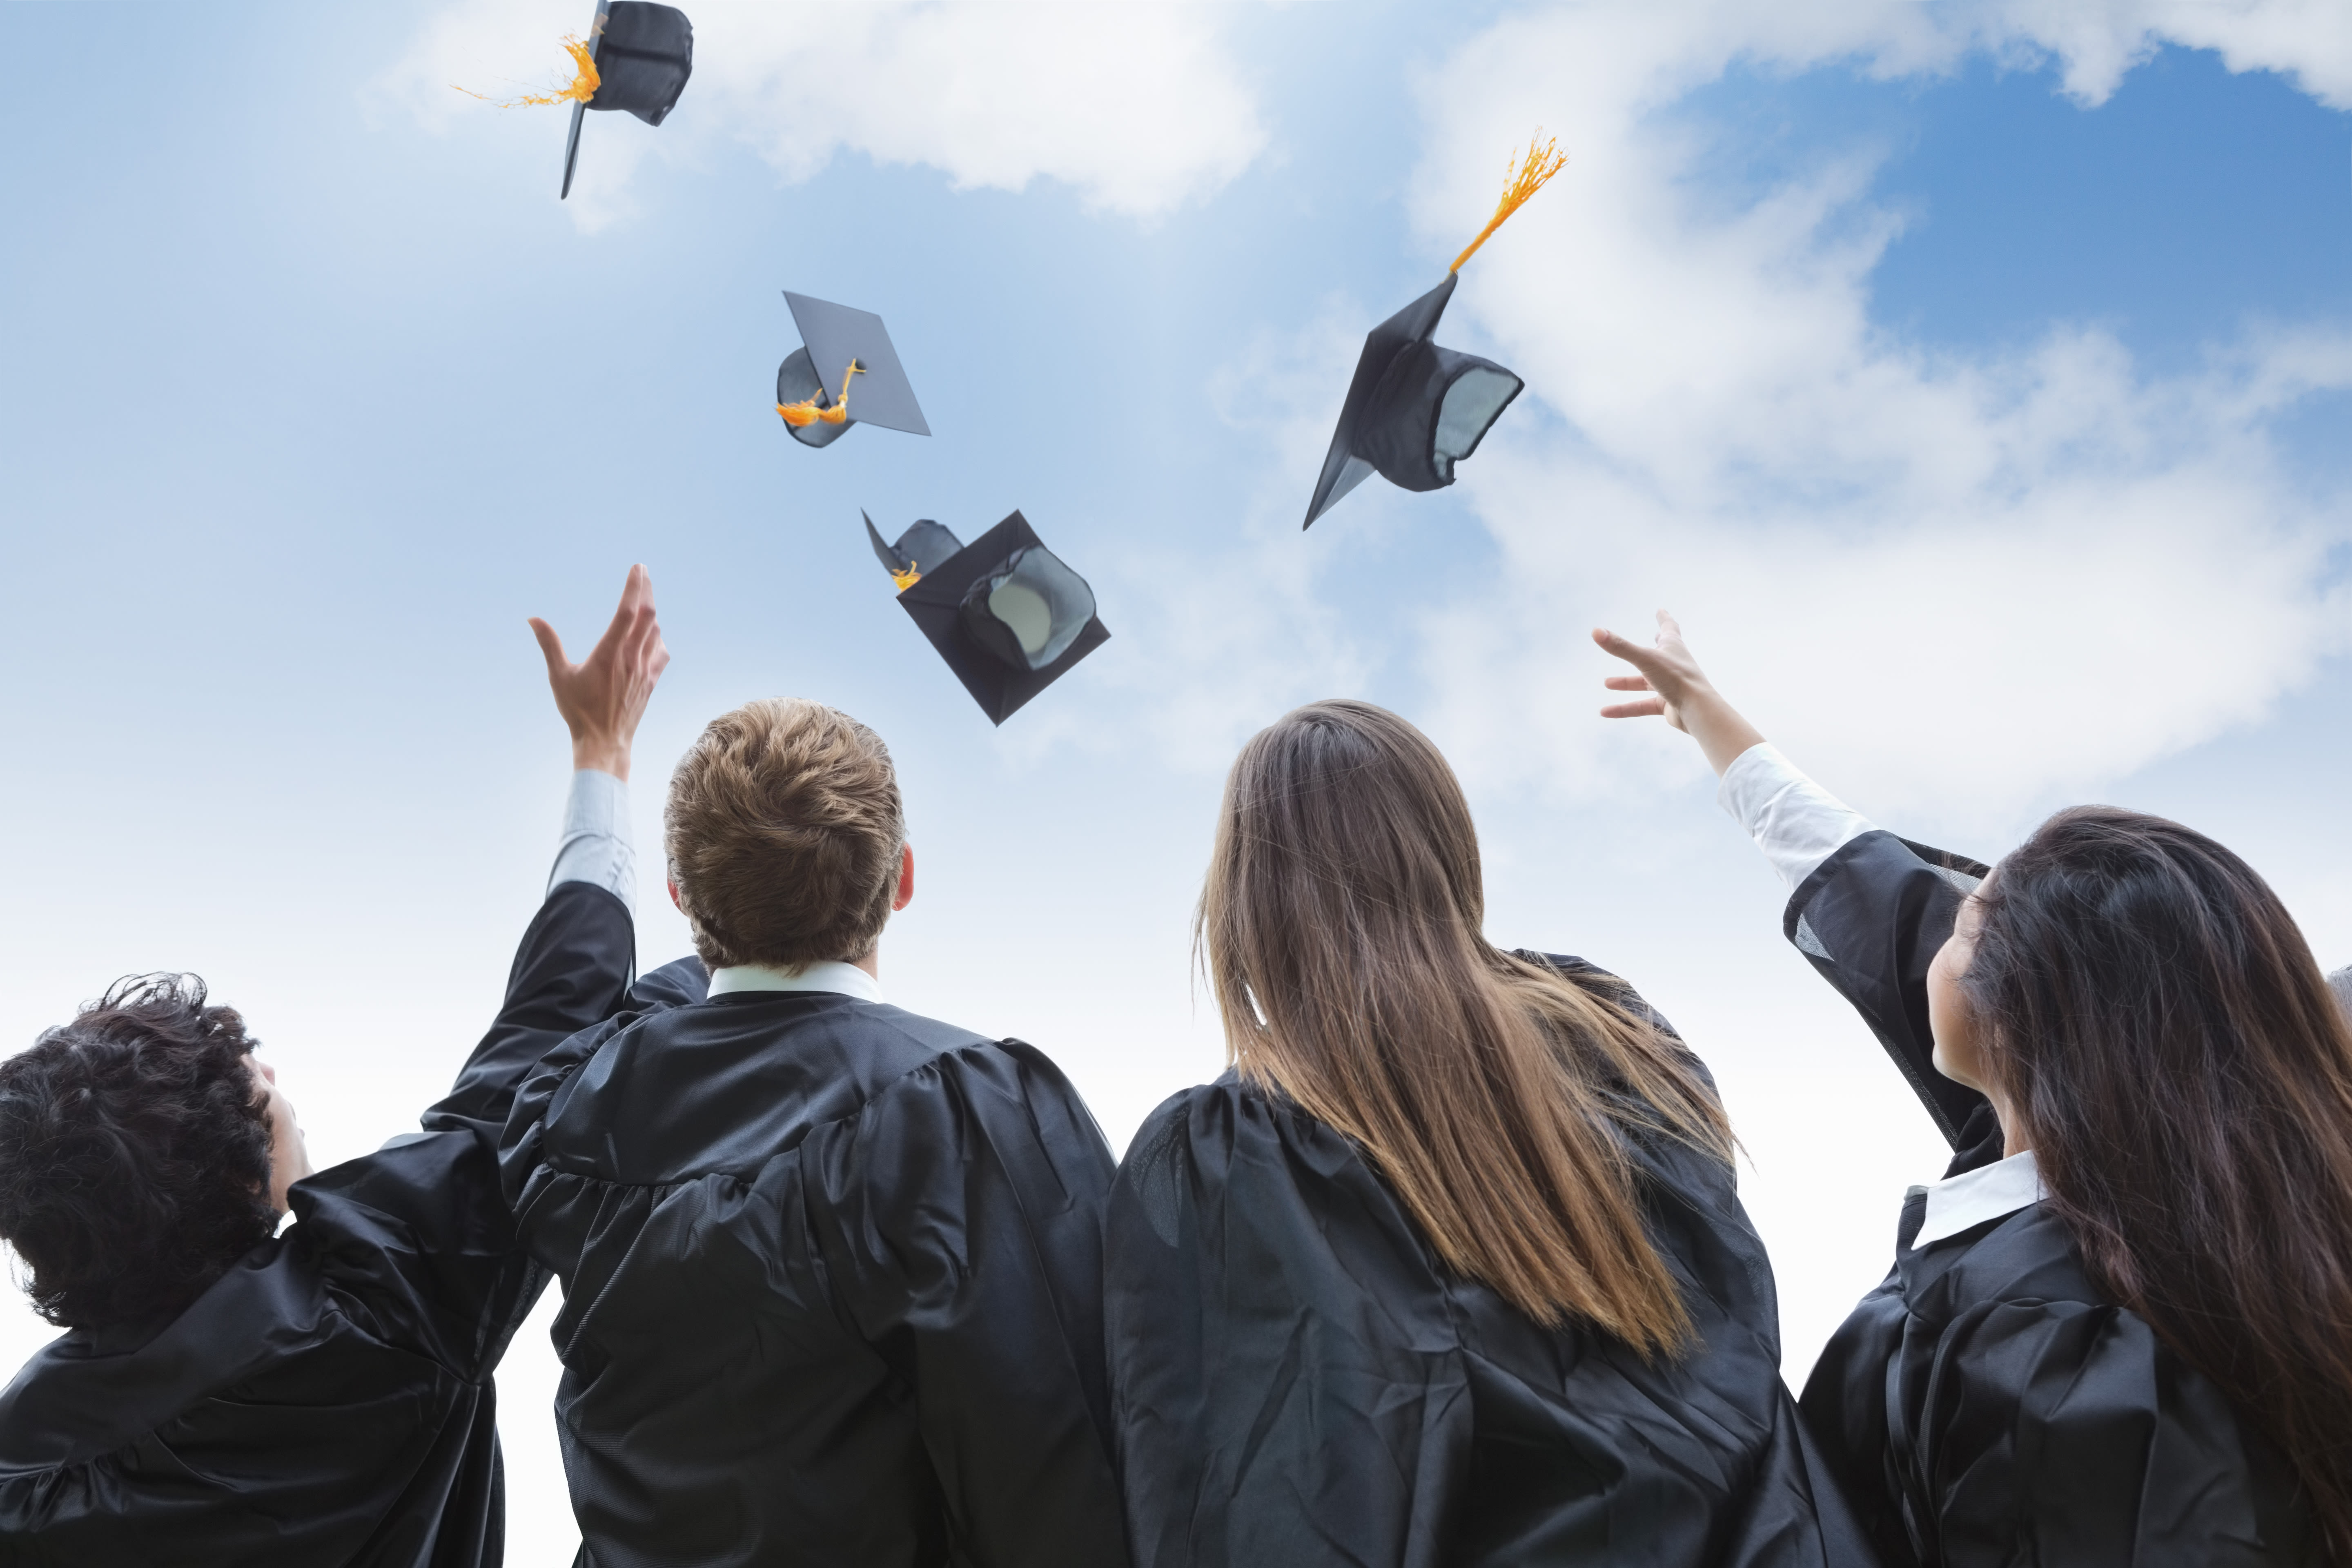 Money buys you freedom: Advice for new college graduates